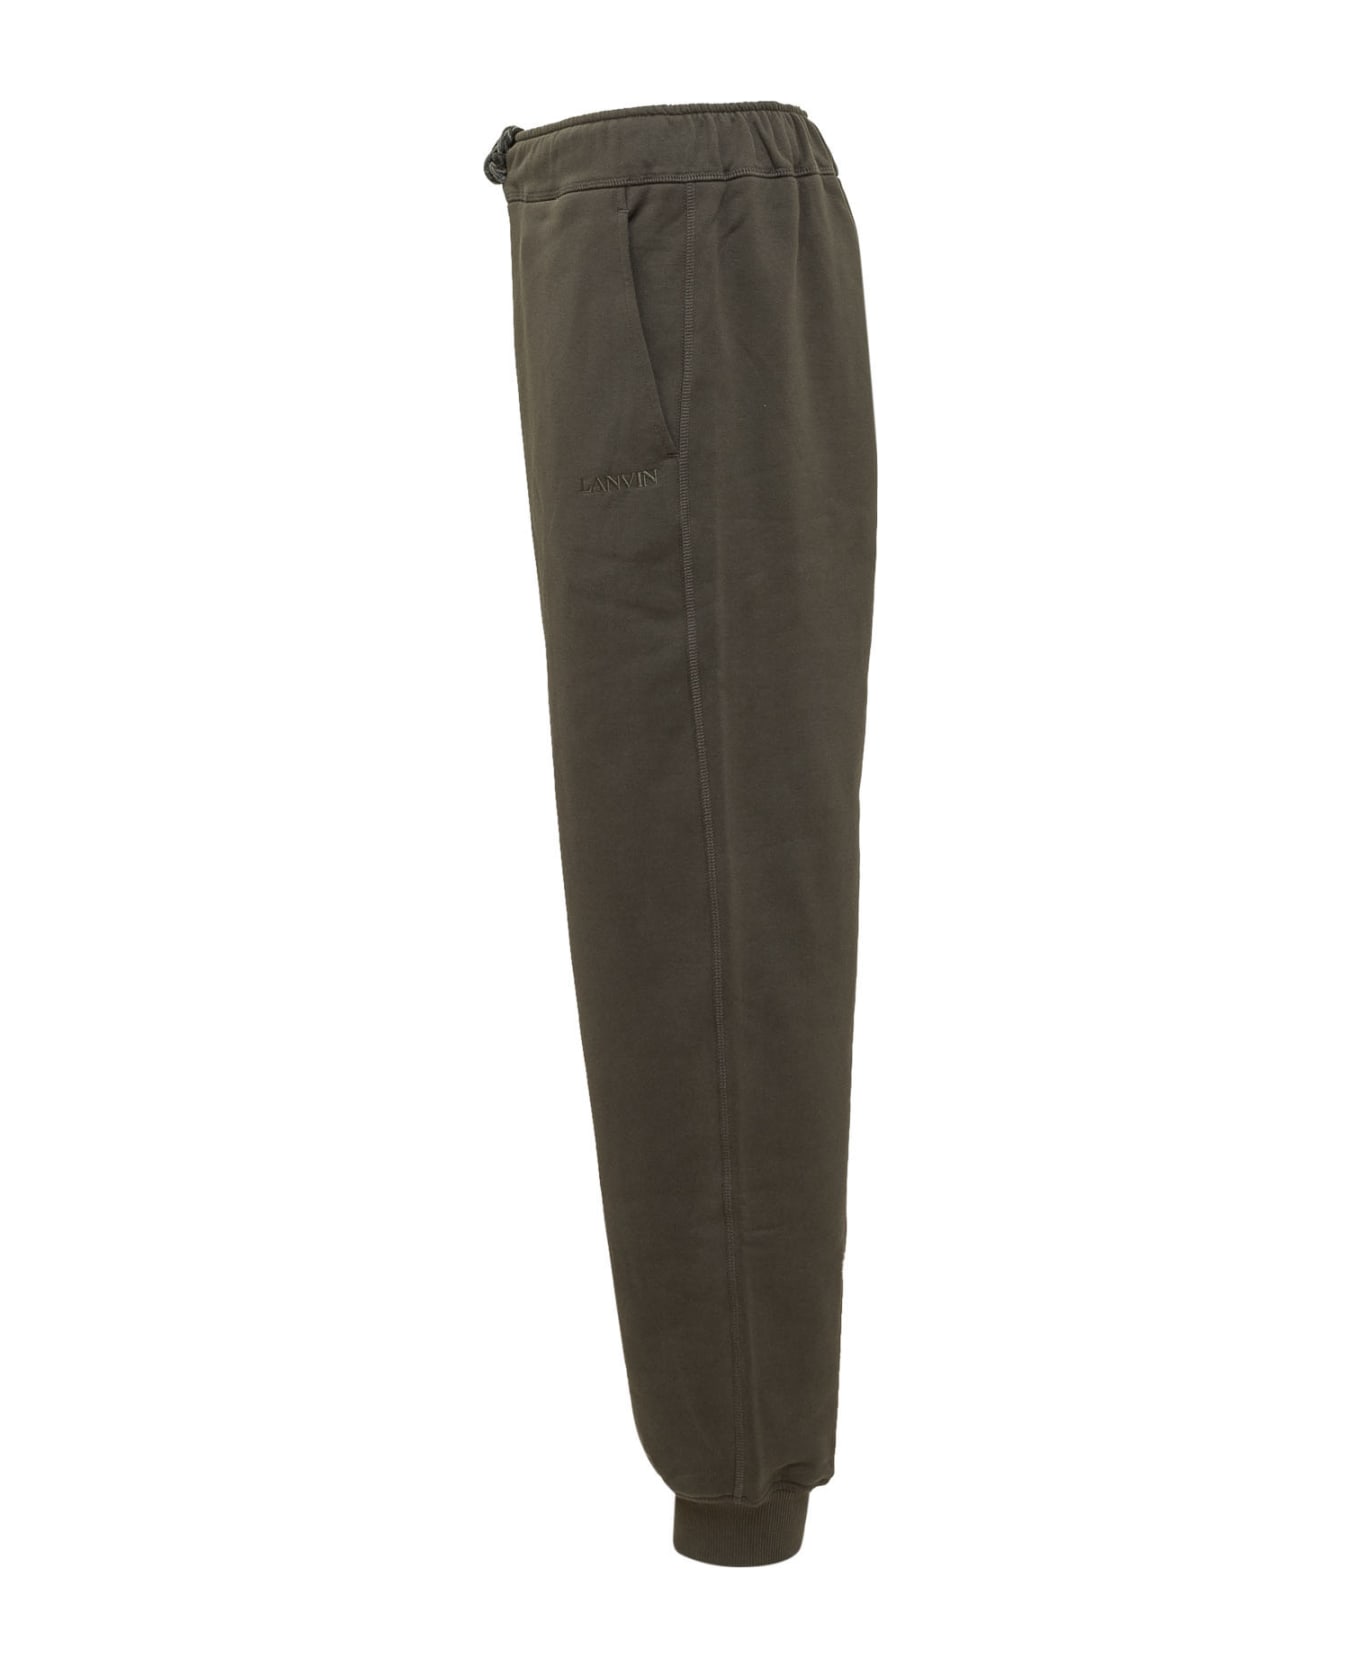 Lanvin Trousers - LODEN ボトムス